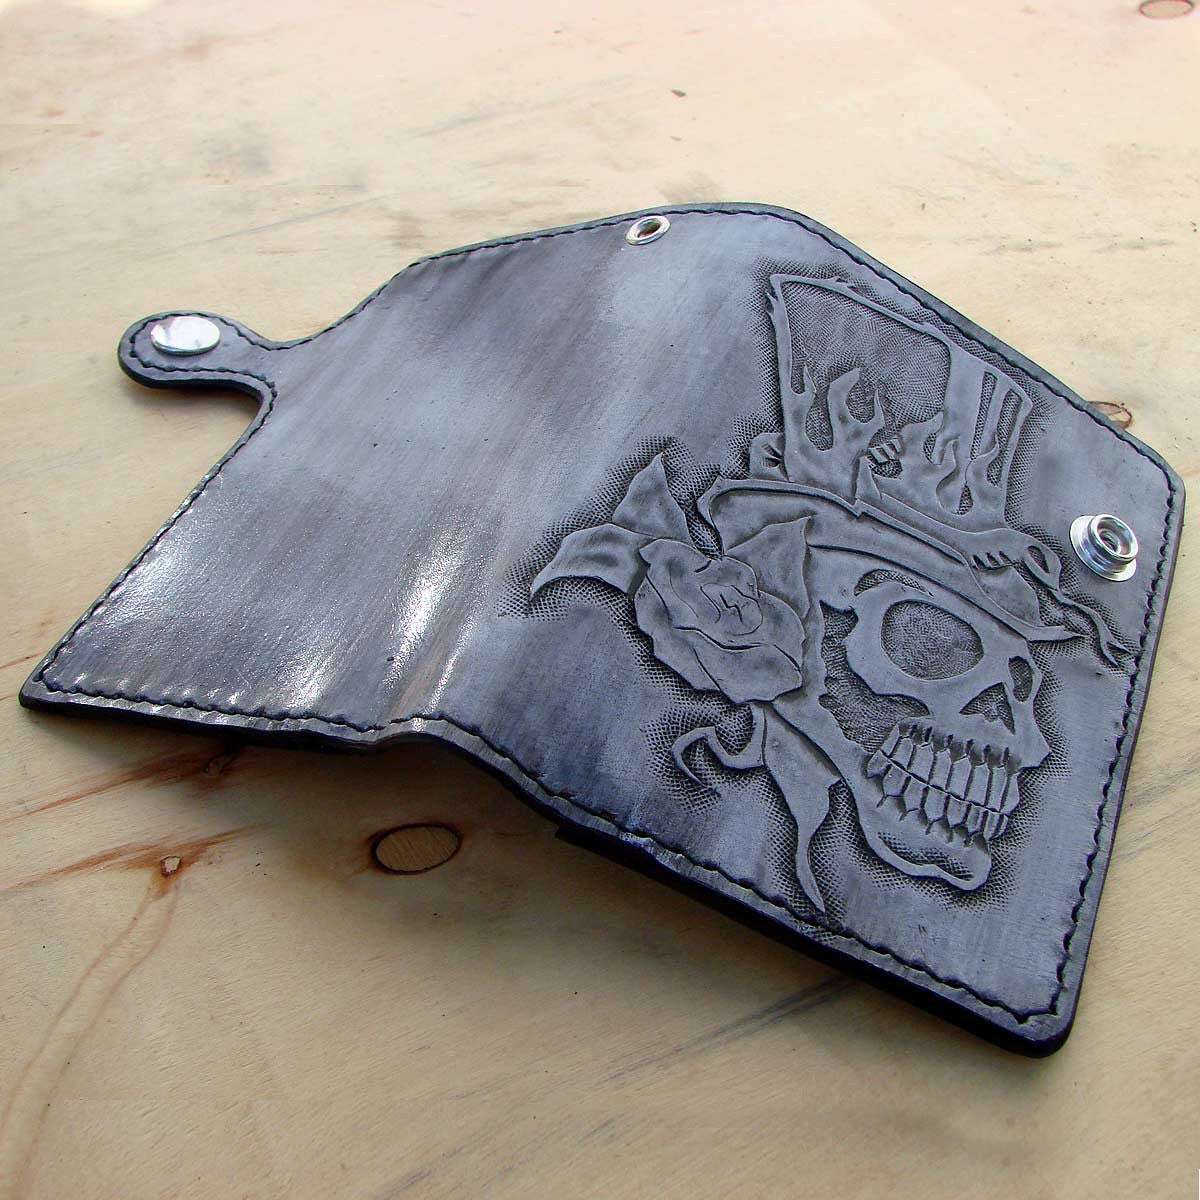 Bifold cow leather wallet biker style white  with skull by Another Way of LifeAnother Way of Life